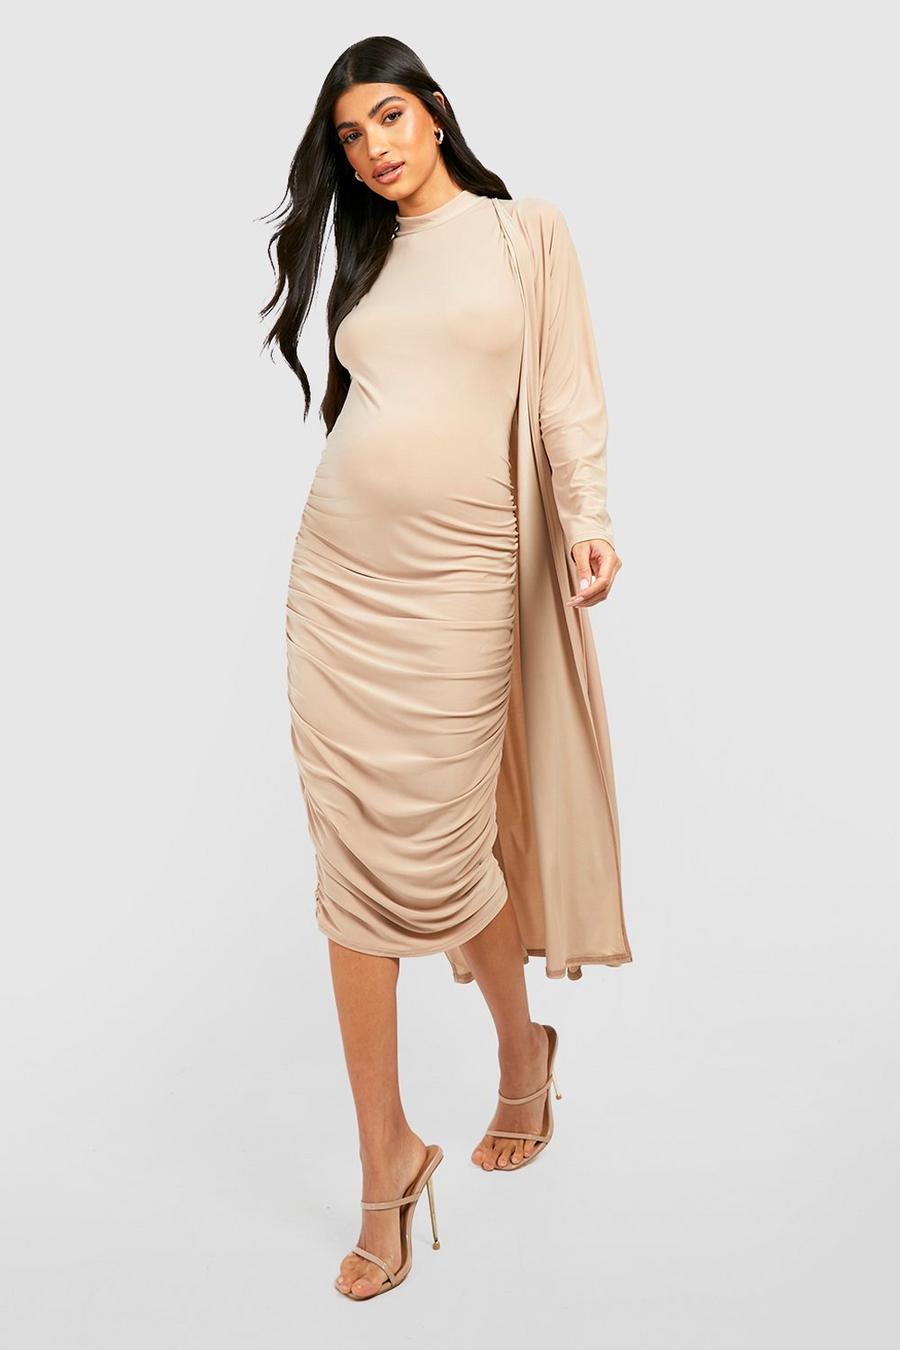 Stone beige Maternity Funnel Neck Dress And Duster Coat